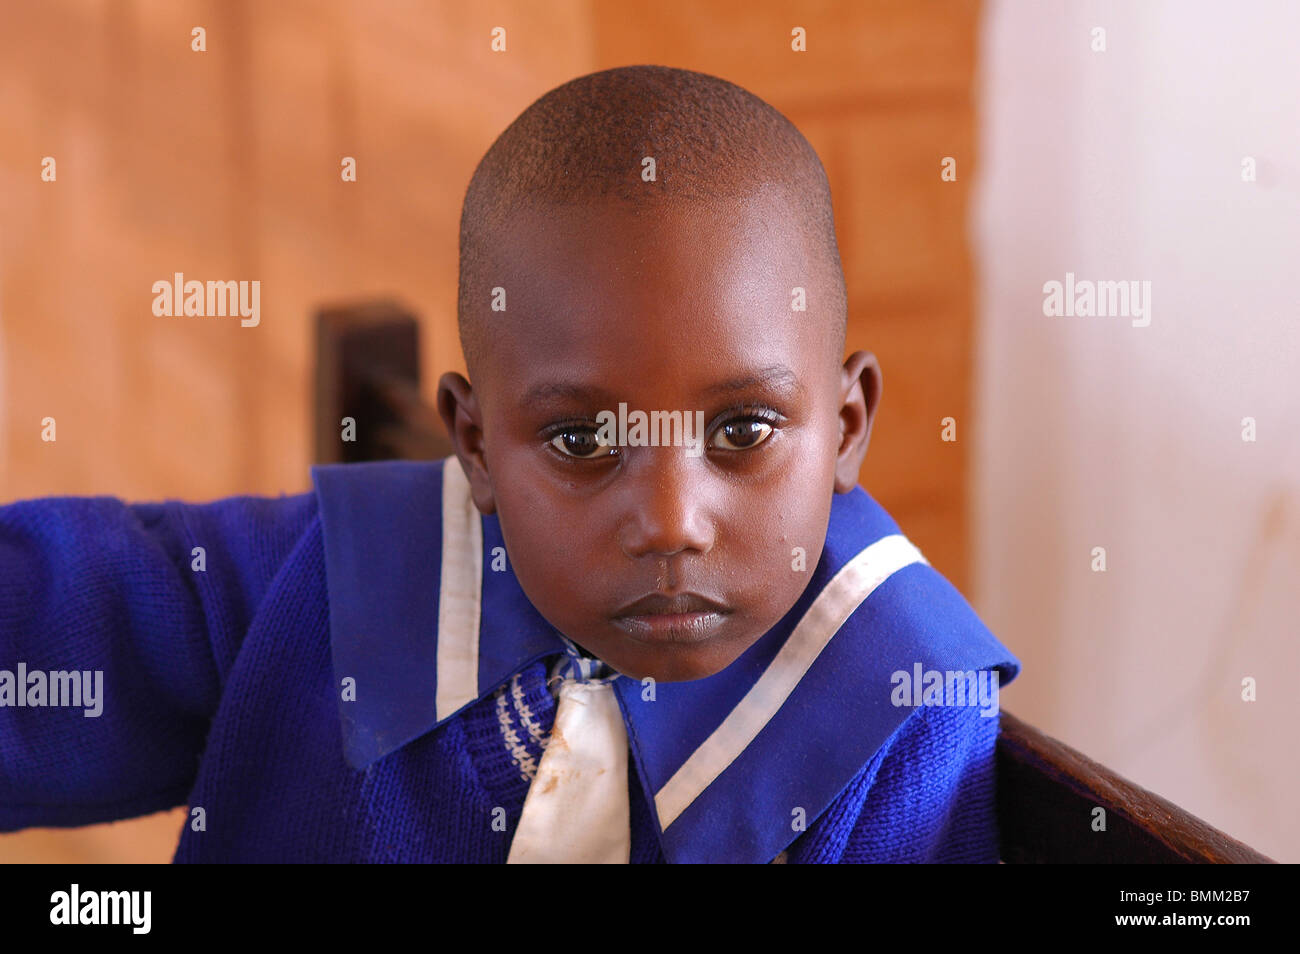 Nigeria, Jos, Portrait of a black child wearing a blue navy style shirt, at a wooden desk, Stock Photo